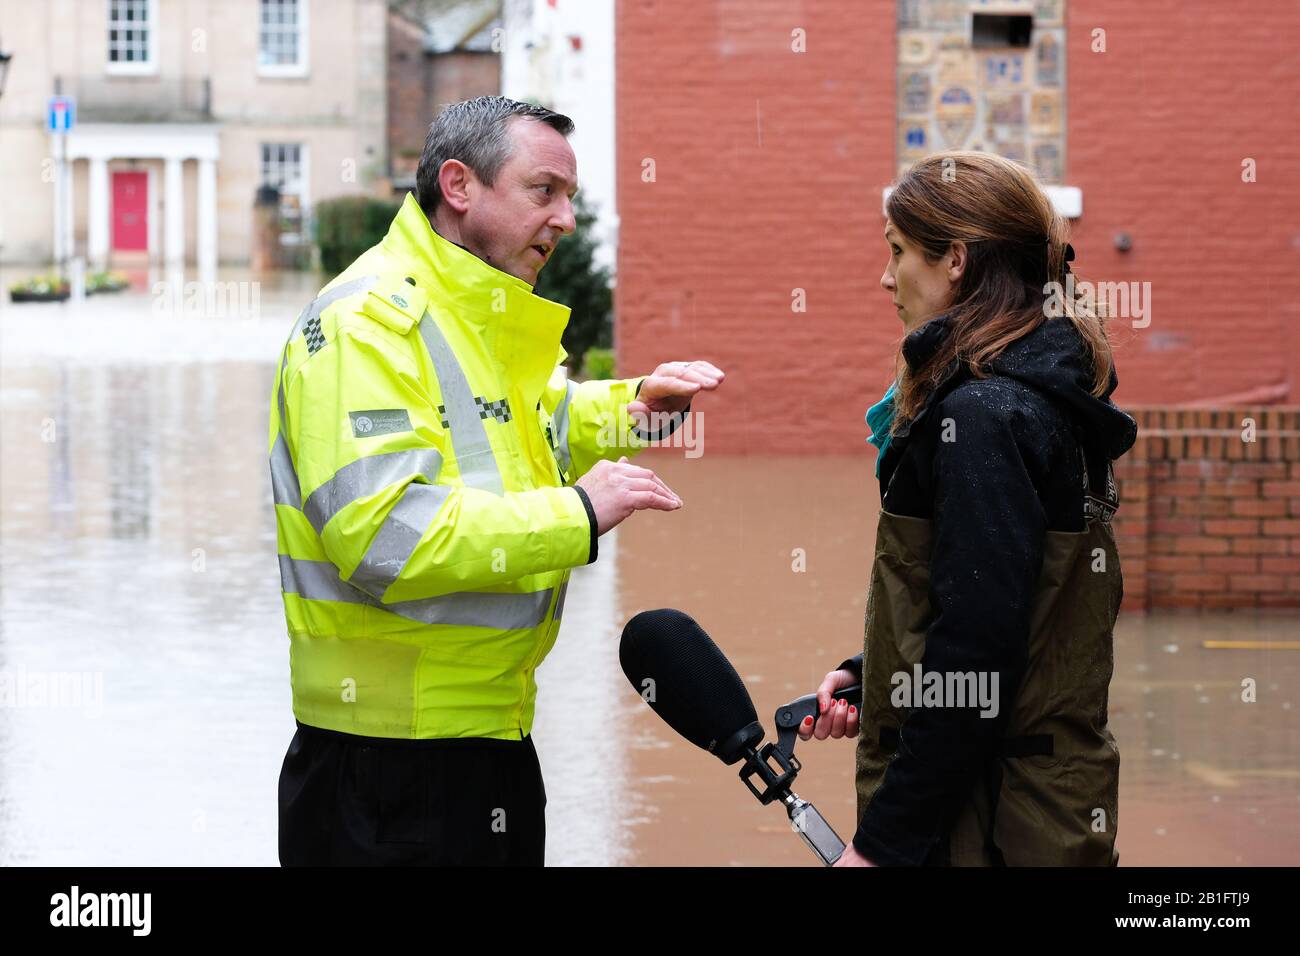 Shrewsbury, Shropshire, UK - Tuesday 25th February 2020 - Environment Agency spokesman Chris Bainger talks about the flooding to the media in Shrewsbury town centre. The River Severn will peak later today and a Severe Flood Warning is currently in force for Shrewsbury. Photo Steven May / Alamy Live News Stock Photo